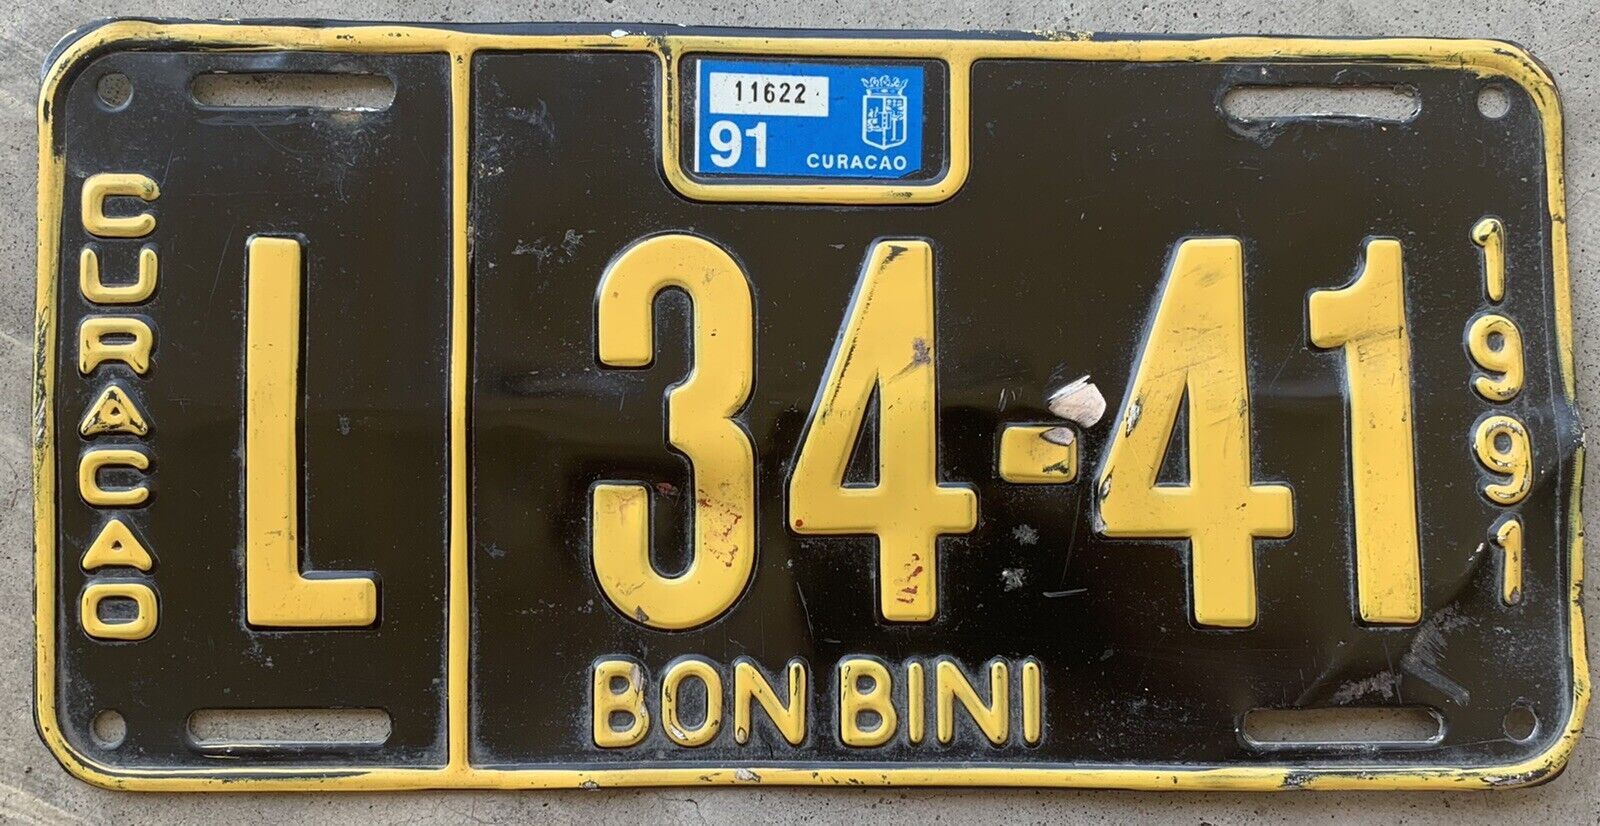 1991 CURACAO BON BINI LICENSE PLATE #L3441 BROWN AND YELLOW WITH STICKER